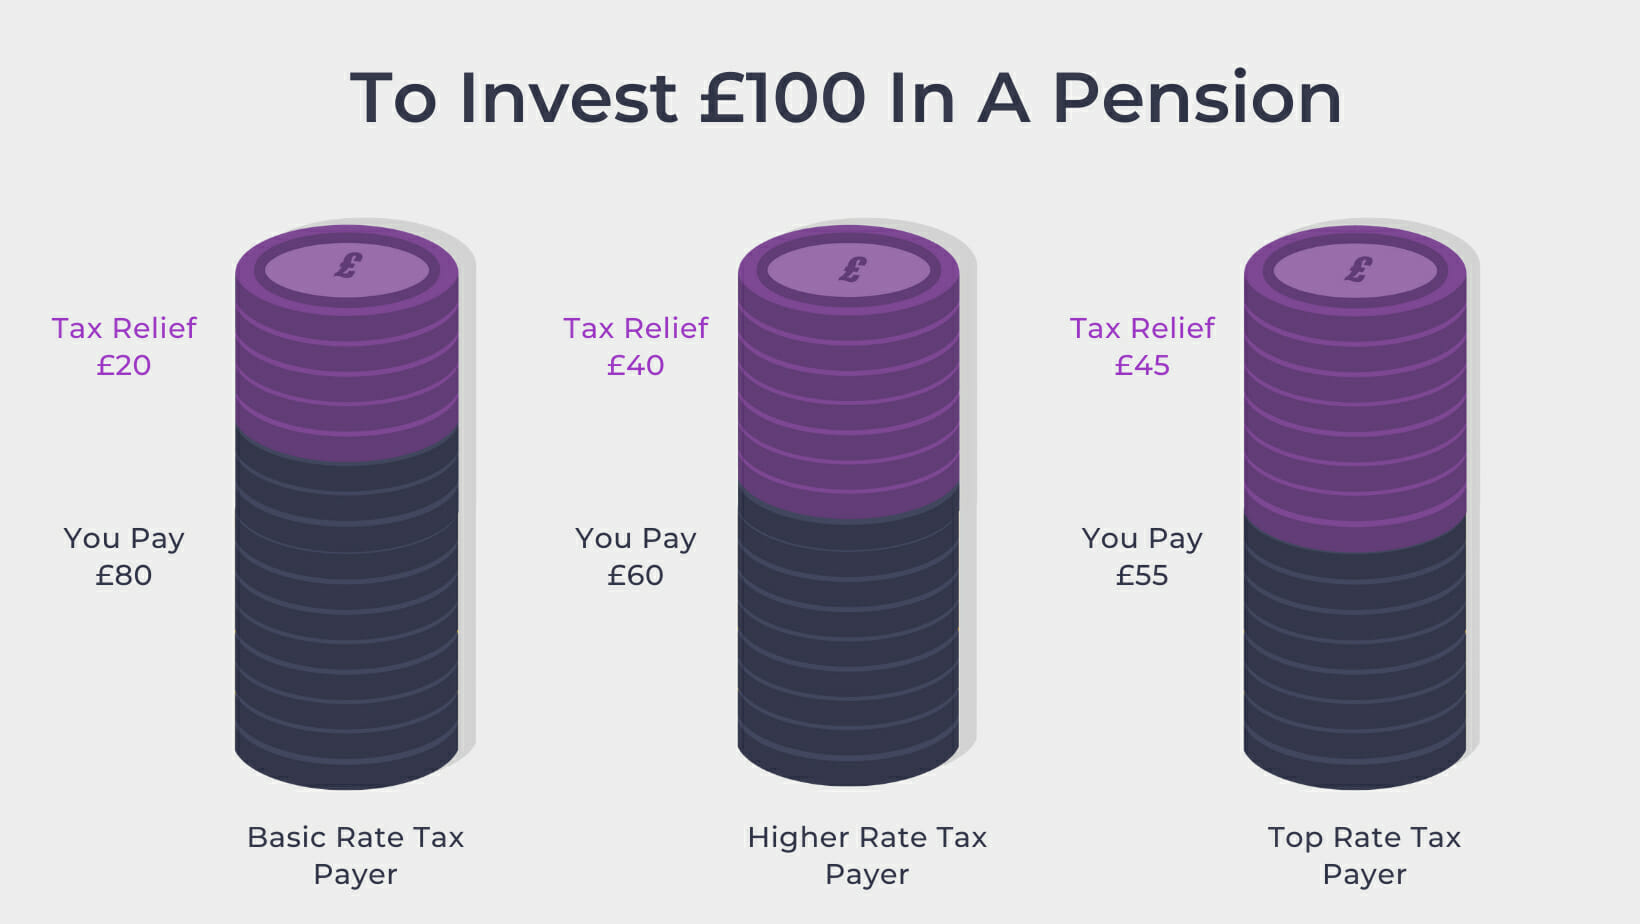 Invest £100 in pension